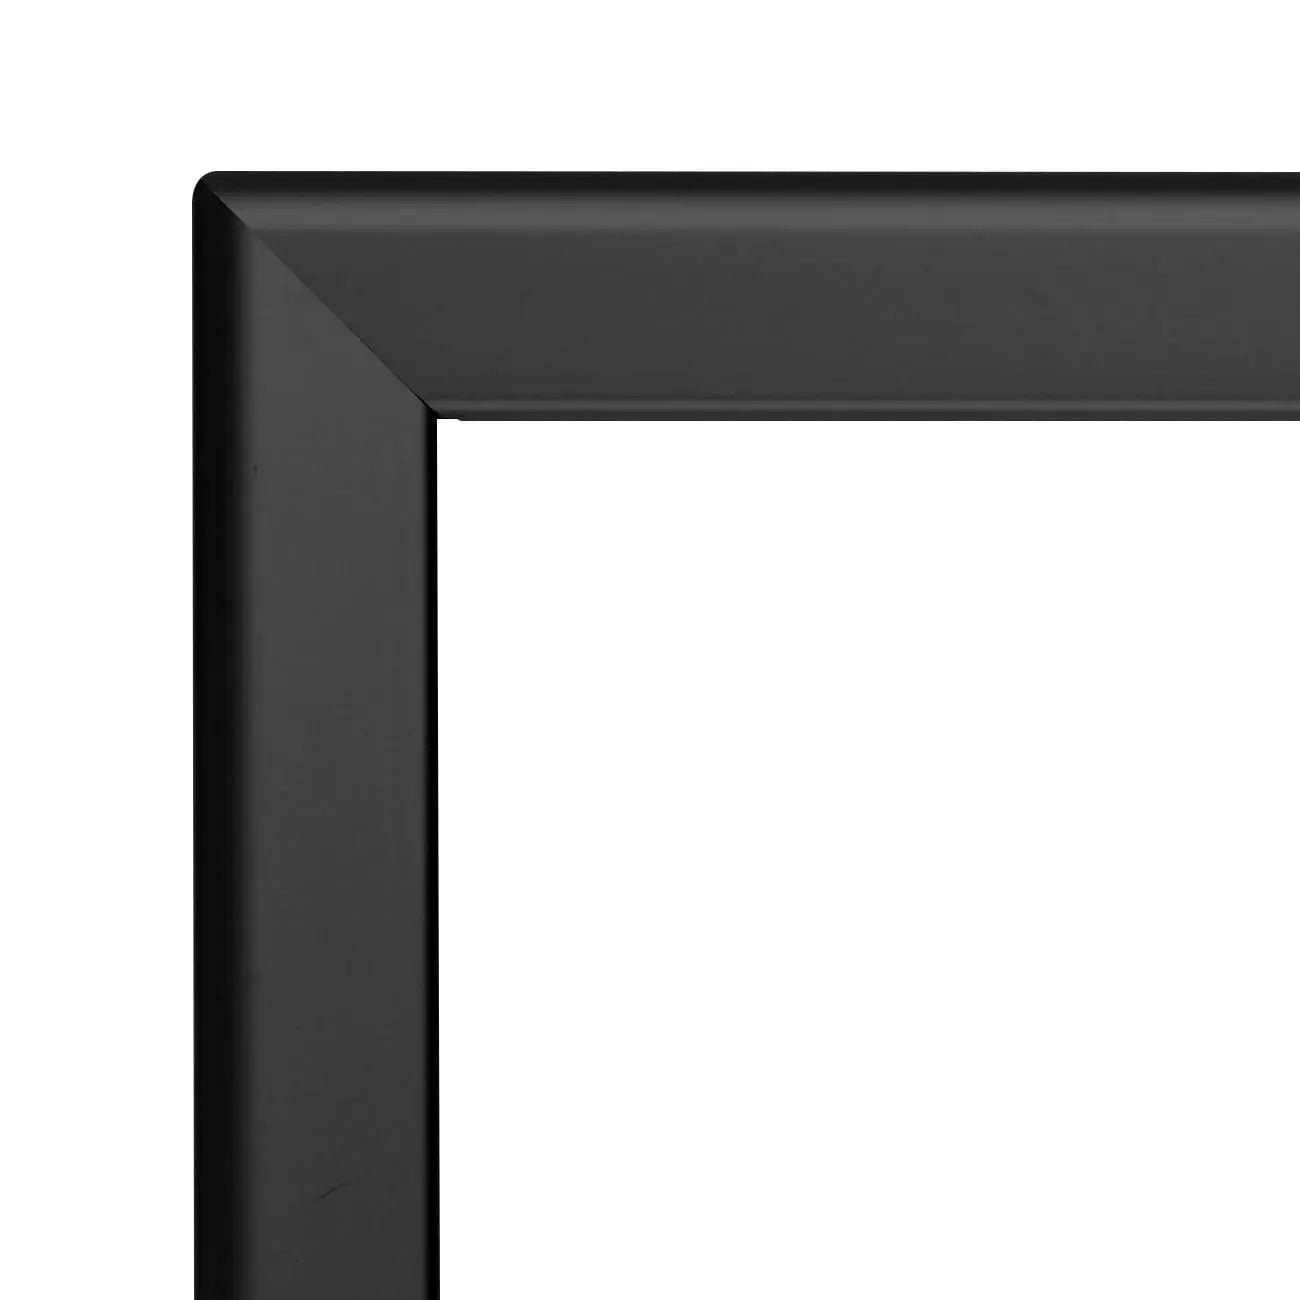 24x30 Black SnapeZo® Double-Sided - 1.25" Profile - Snap Frames Direct